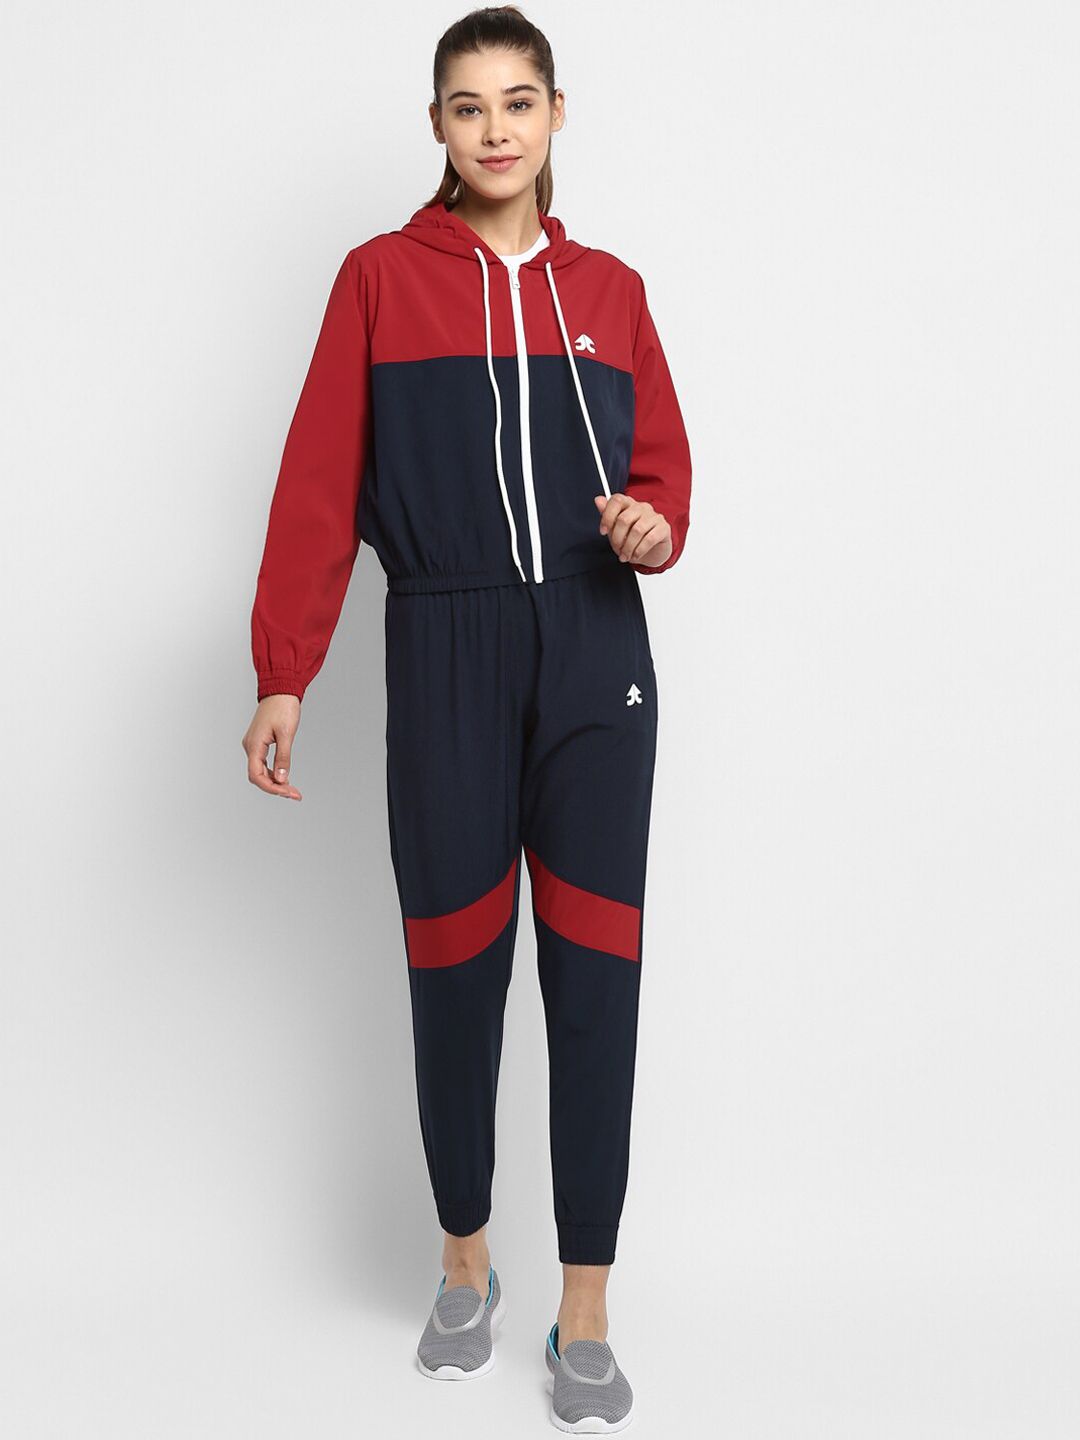 OFF LIMITS Women Navy Blue & Red Colourblocked Hooded Tracksuit Price in India